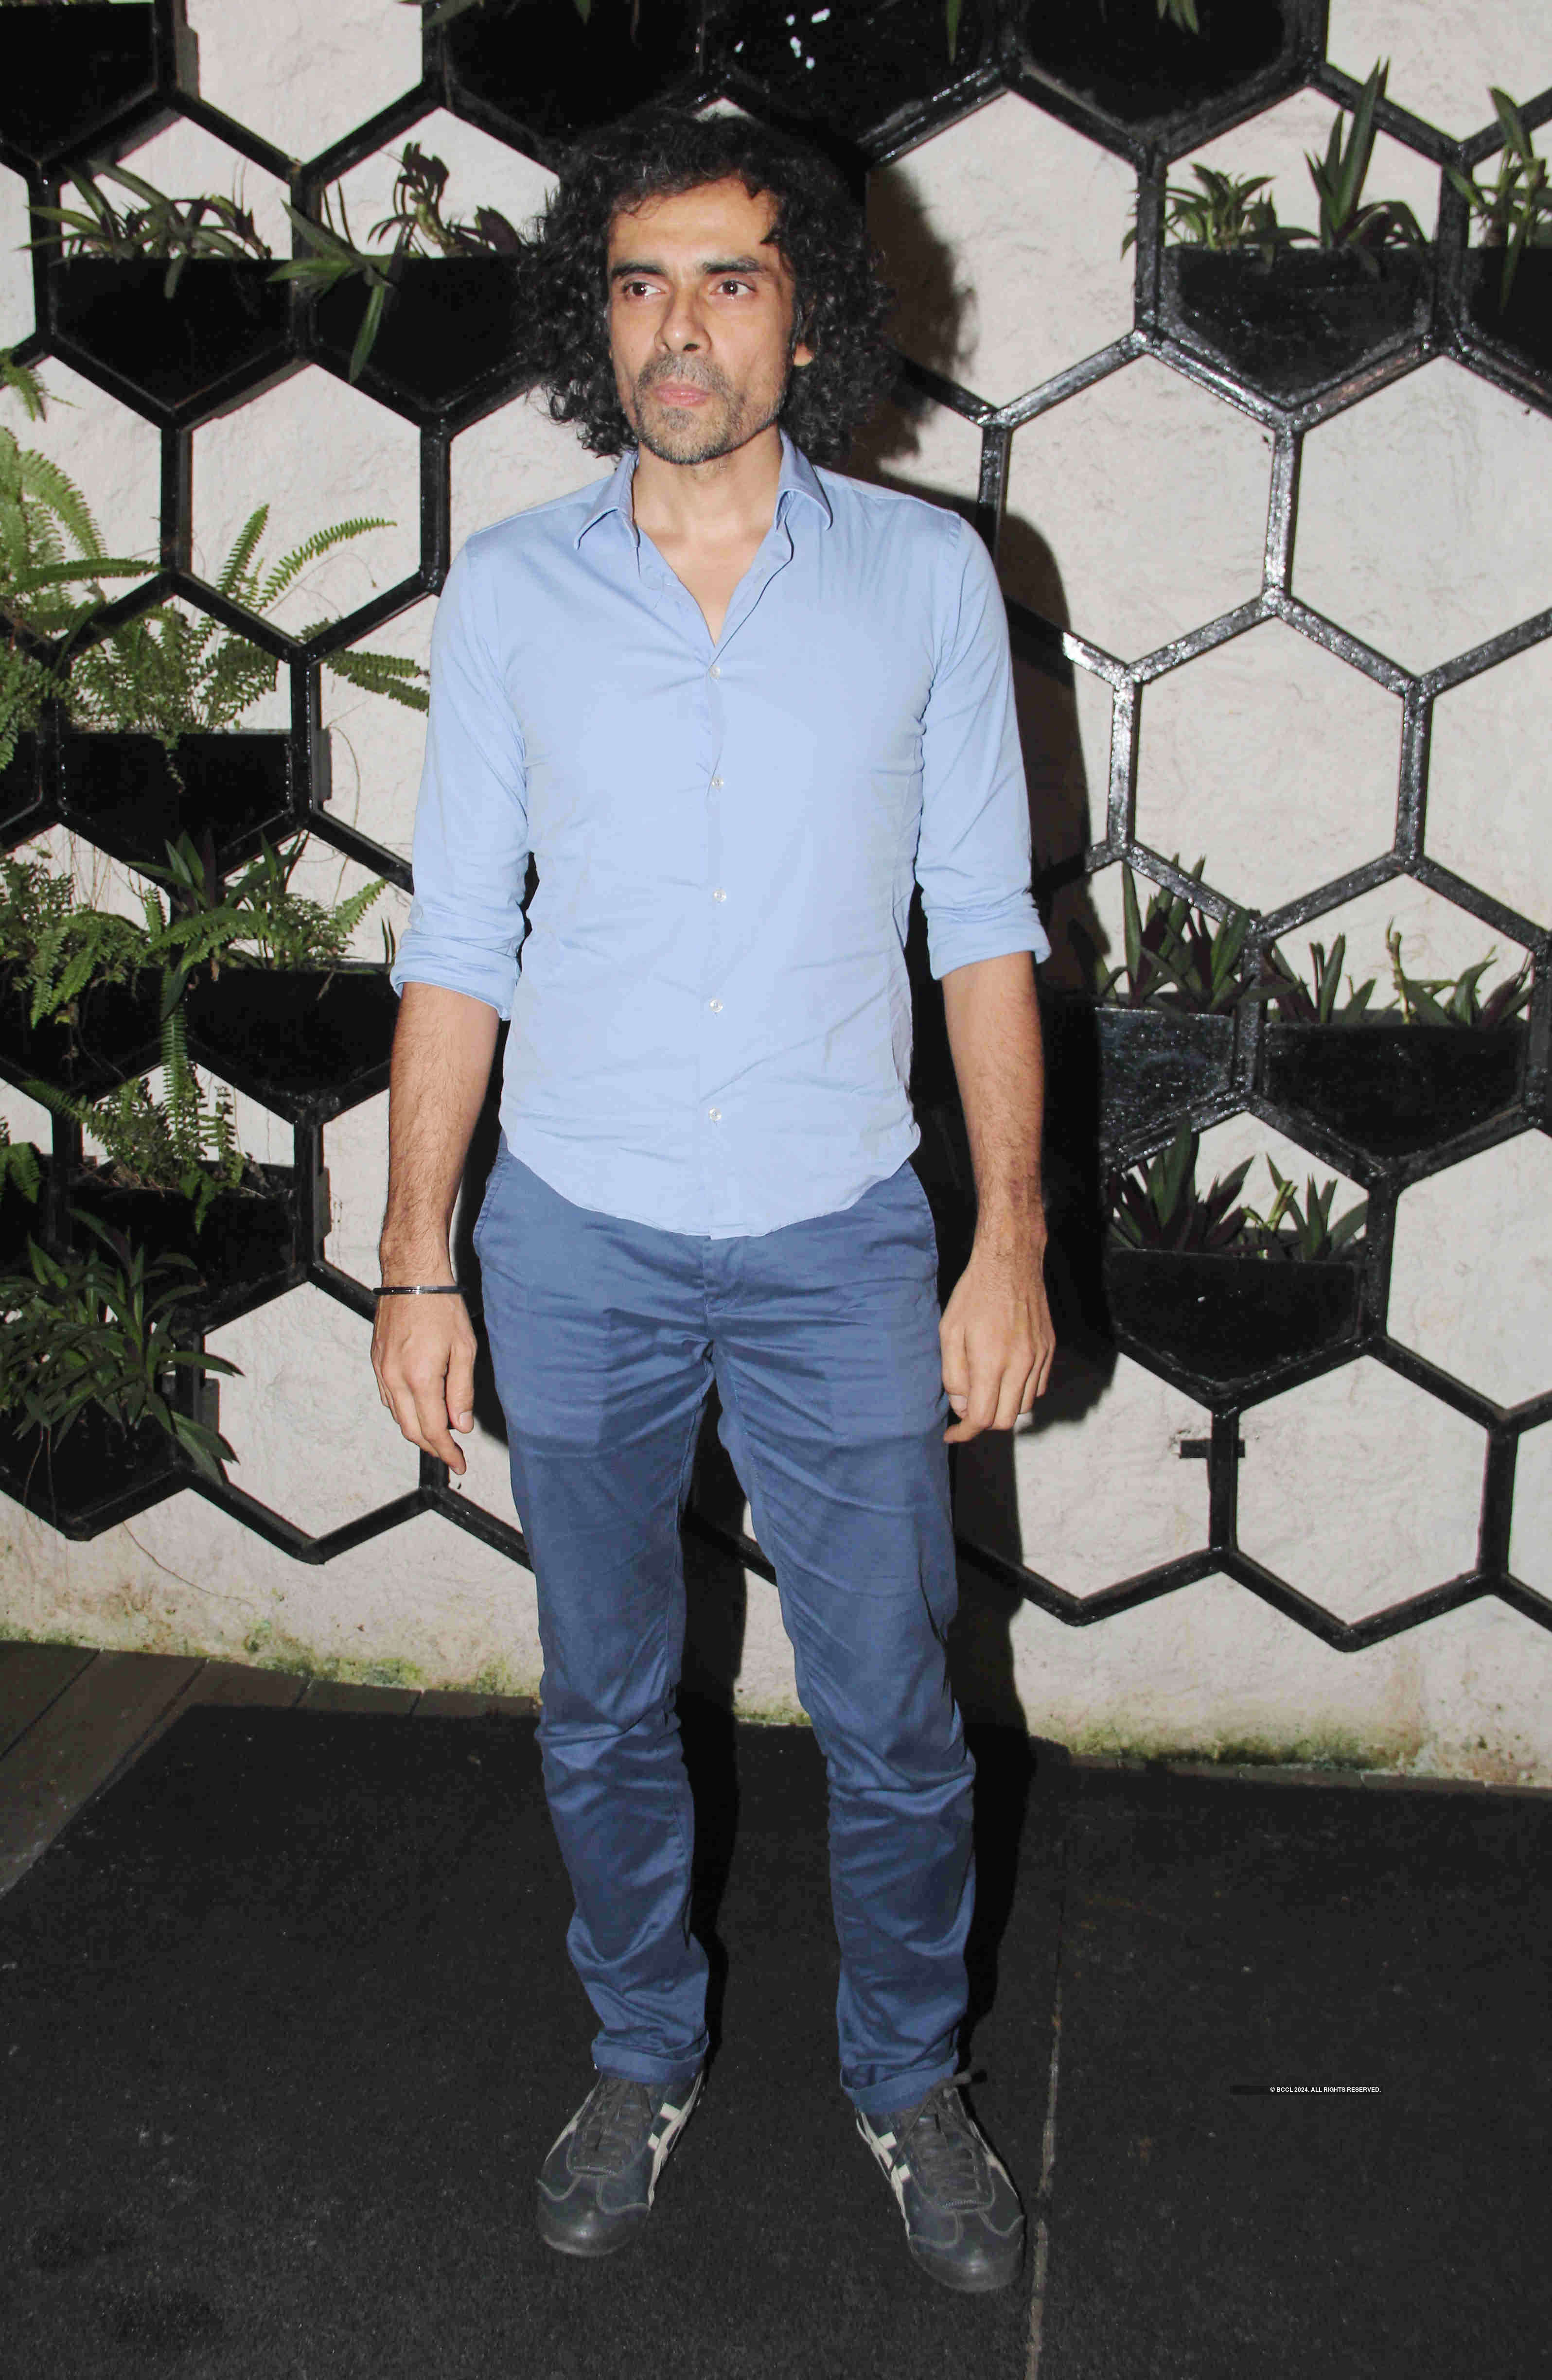 Bollywood celebs come in full attendance at Dinesh Vijan’s birthday party